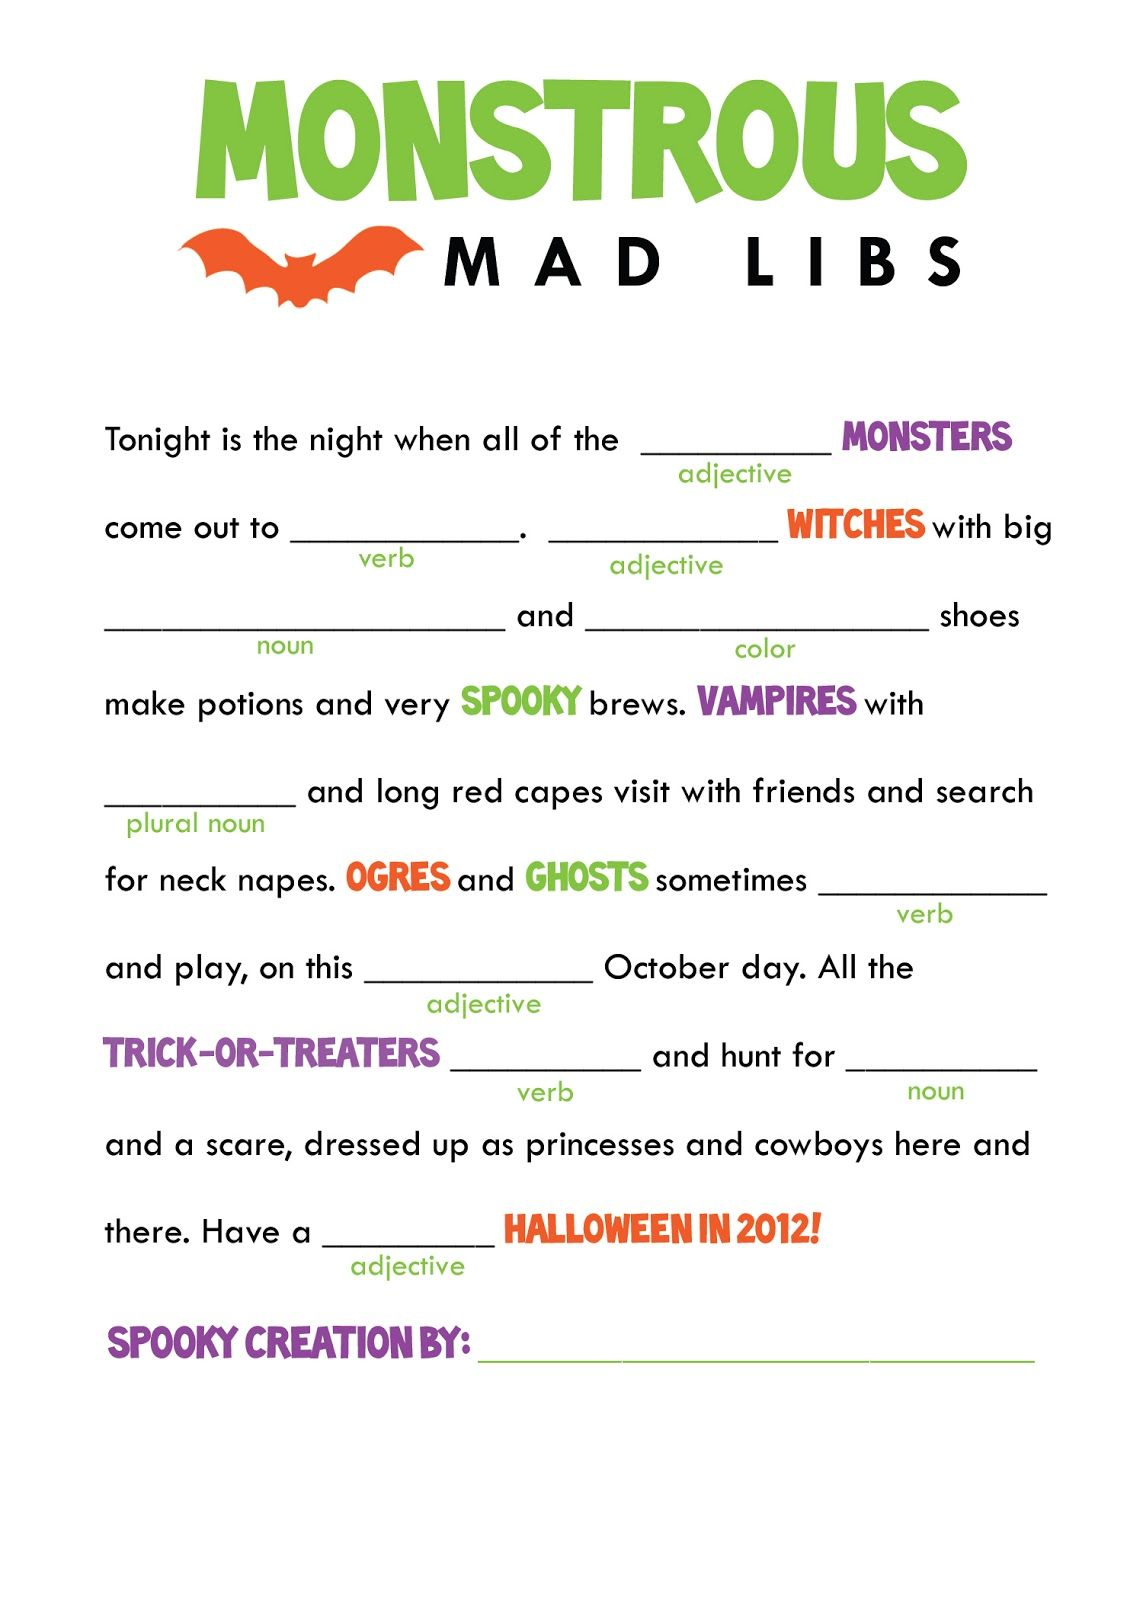 Kids Mad Libs Printable Free Google Search Halloween Party Games